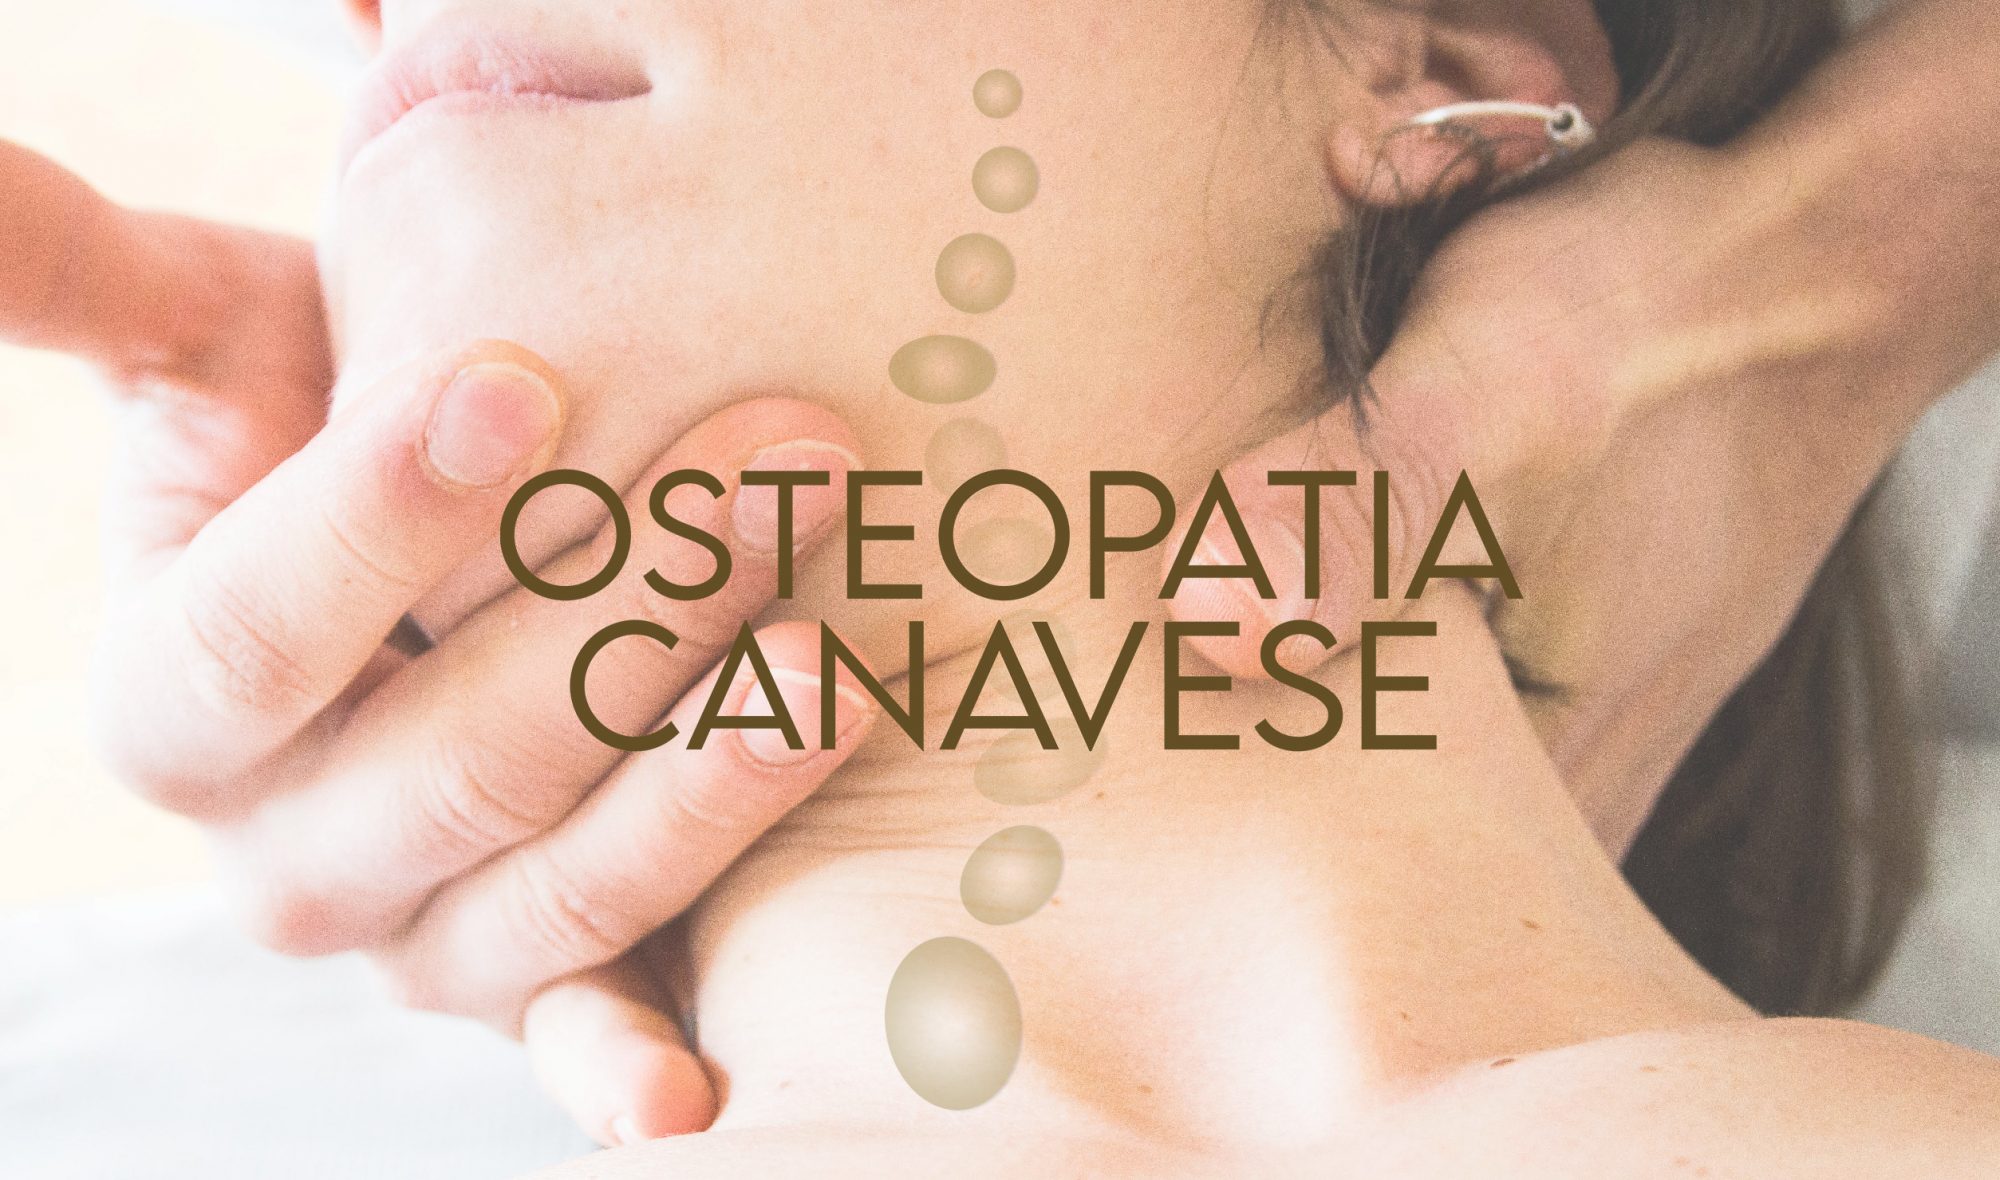  OSTEOPATIA CANAVESE